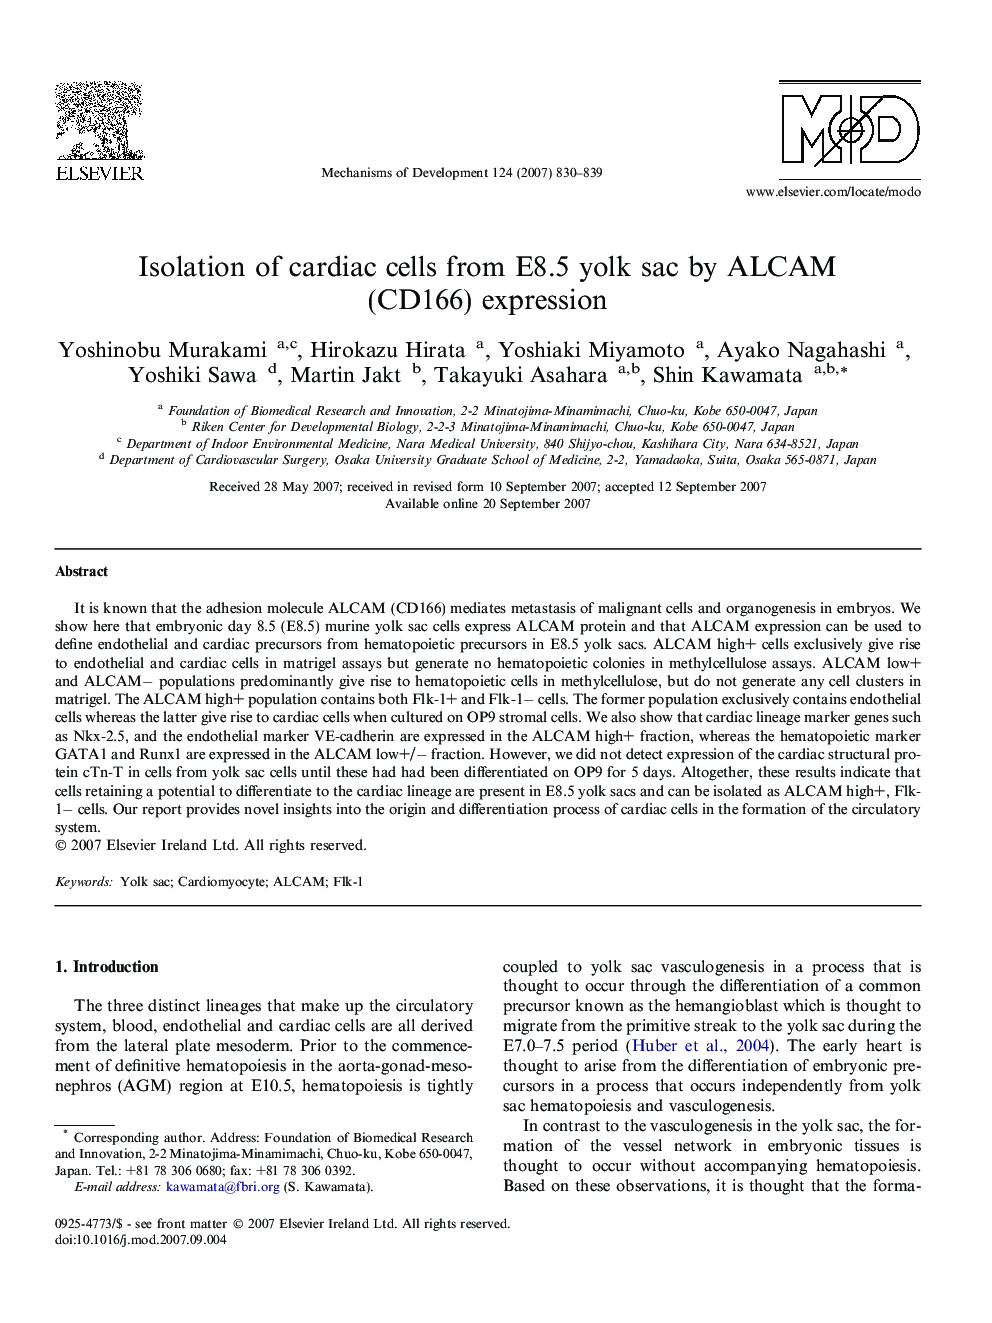 Isolation of cardiac cells from E8.5 yolk sac by ALCAM (CD166) expression